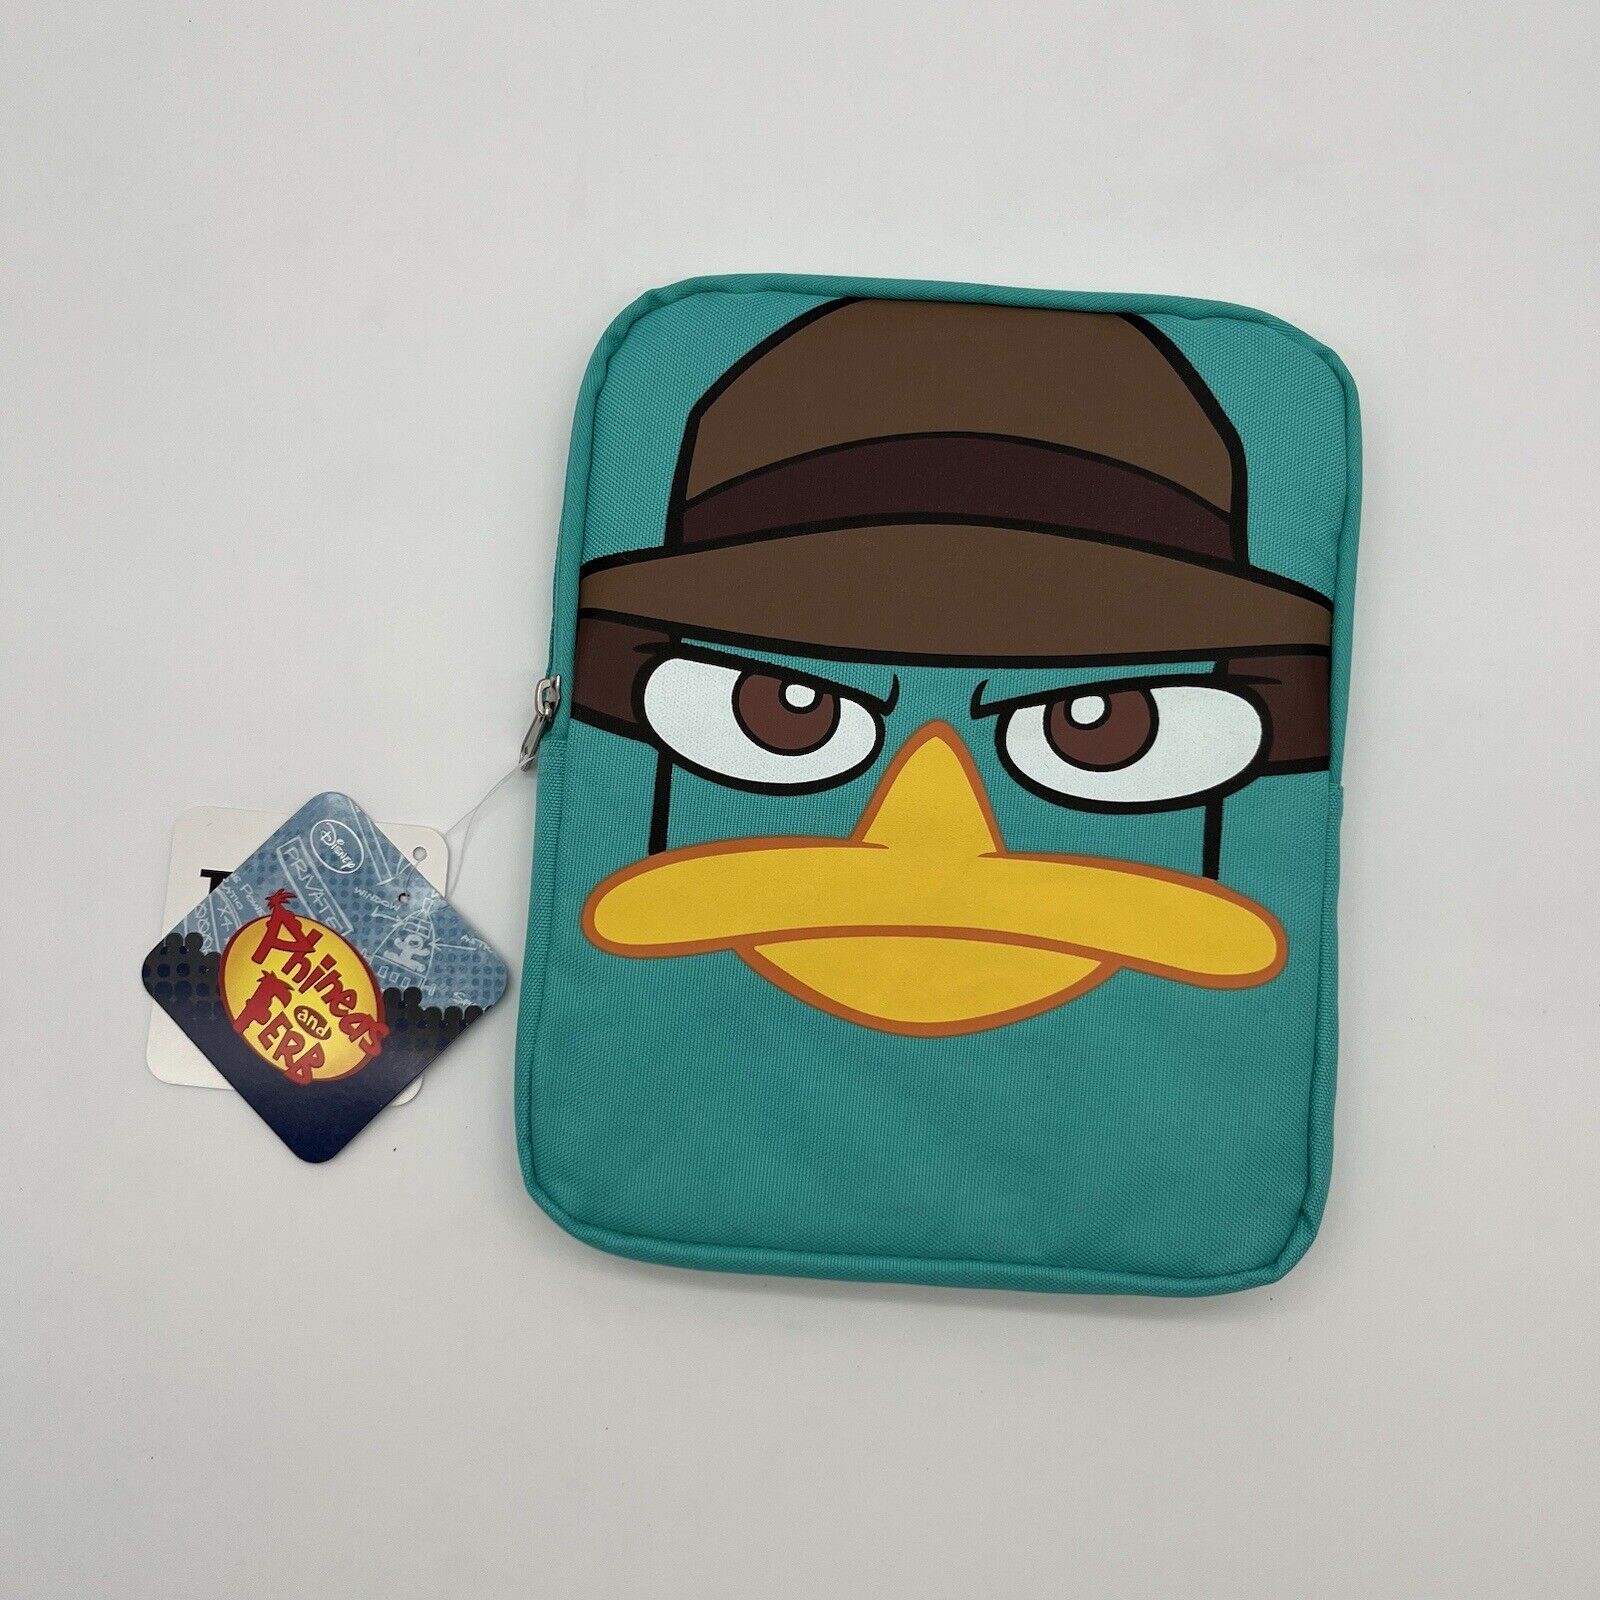 Phineas And Ferb Perry The Platypus Soft Tablet Case 10-1/2” x 8-1/4”